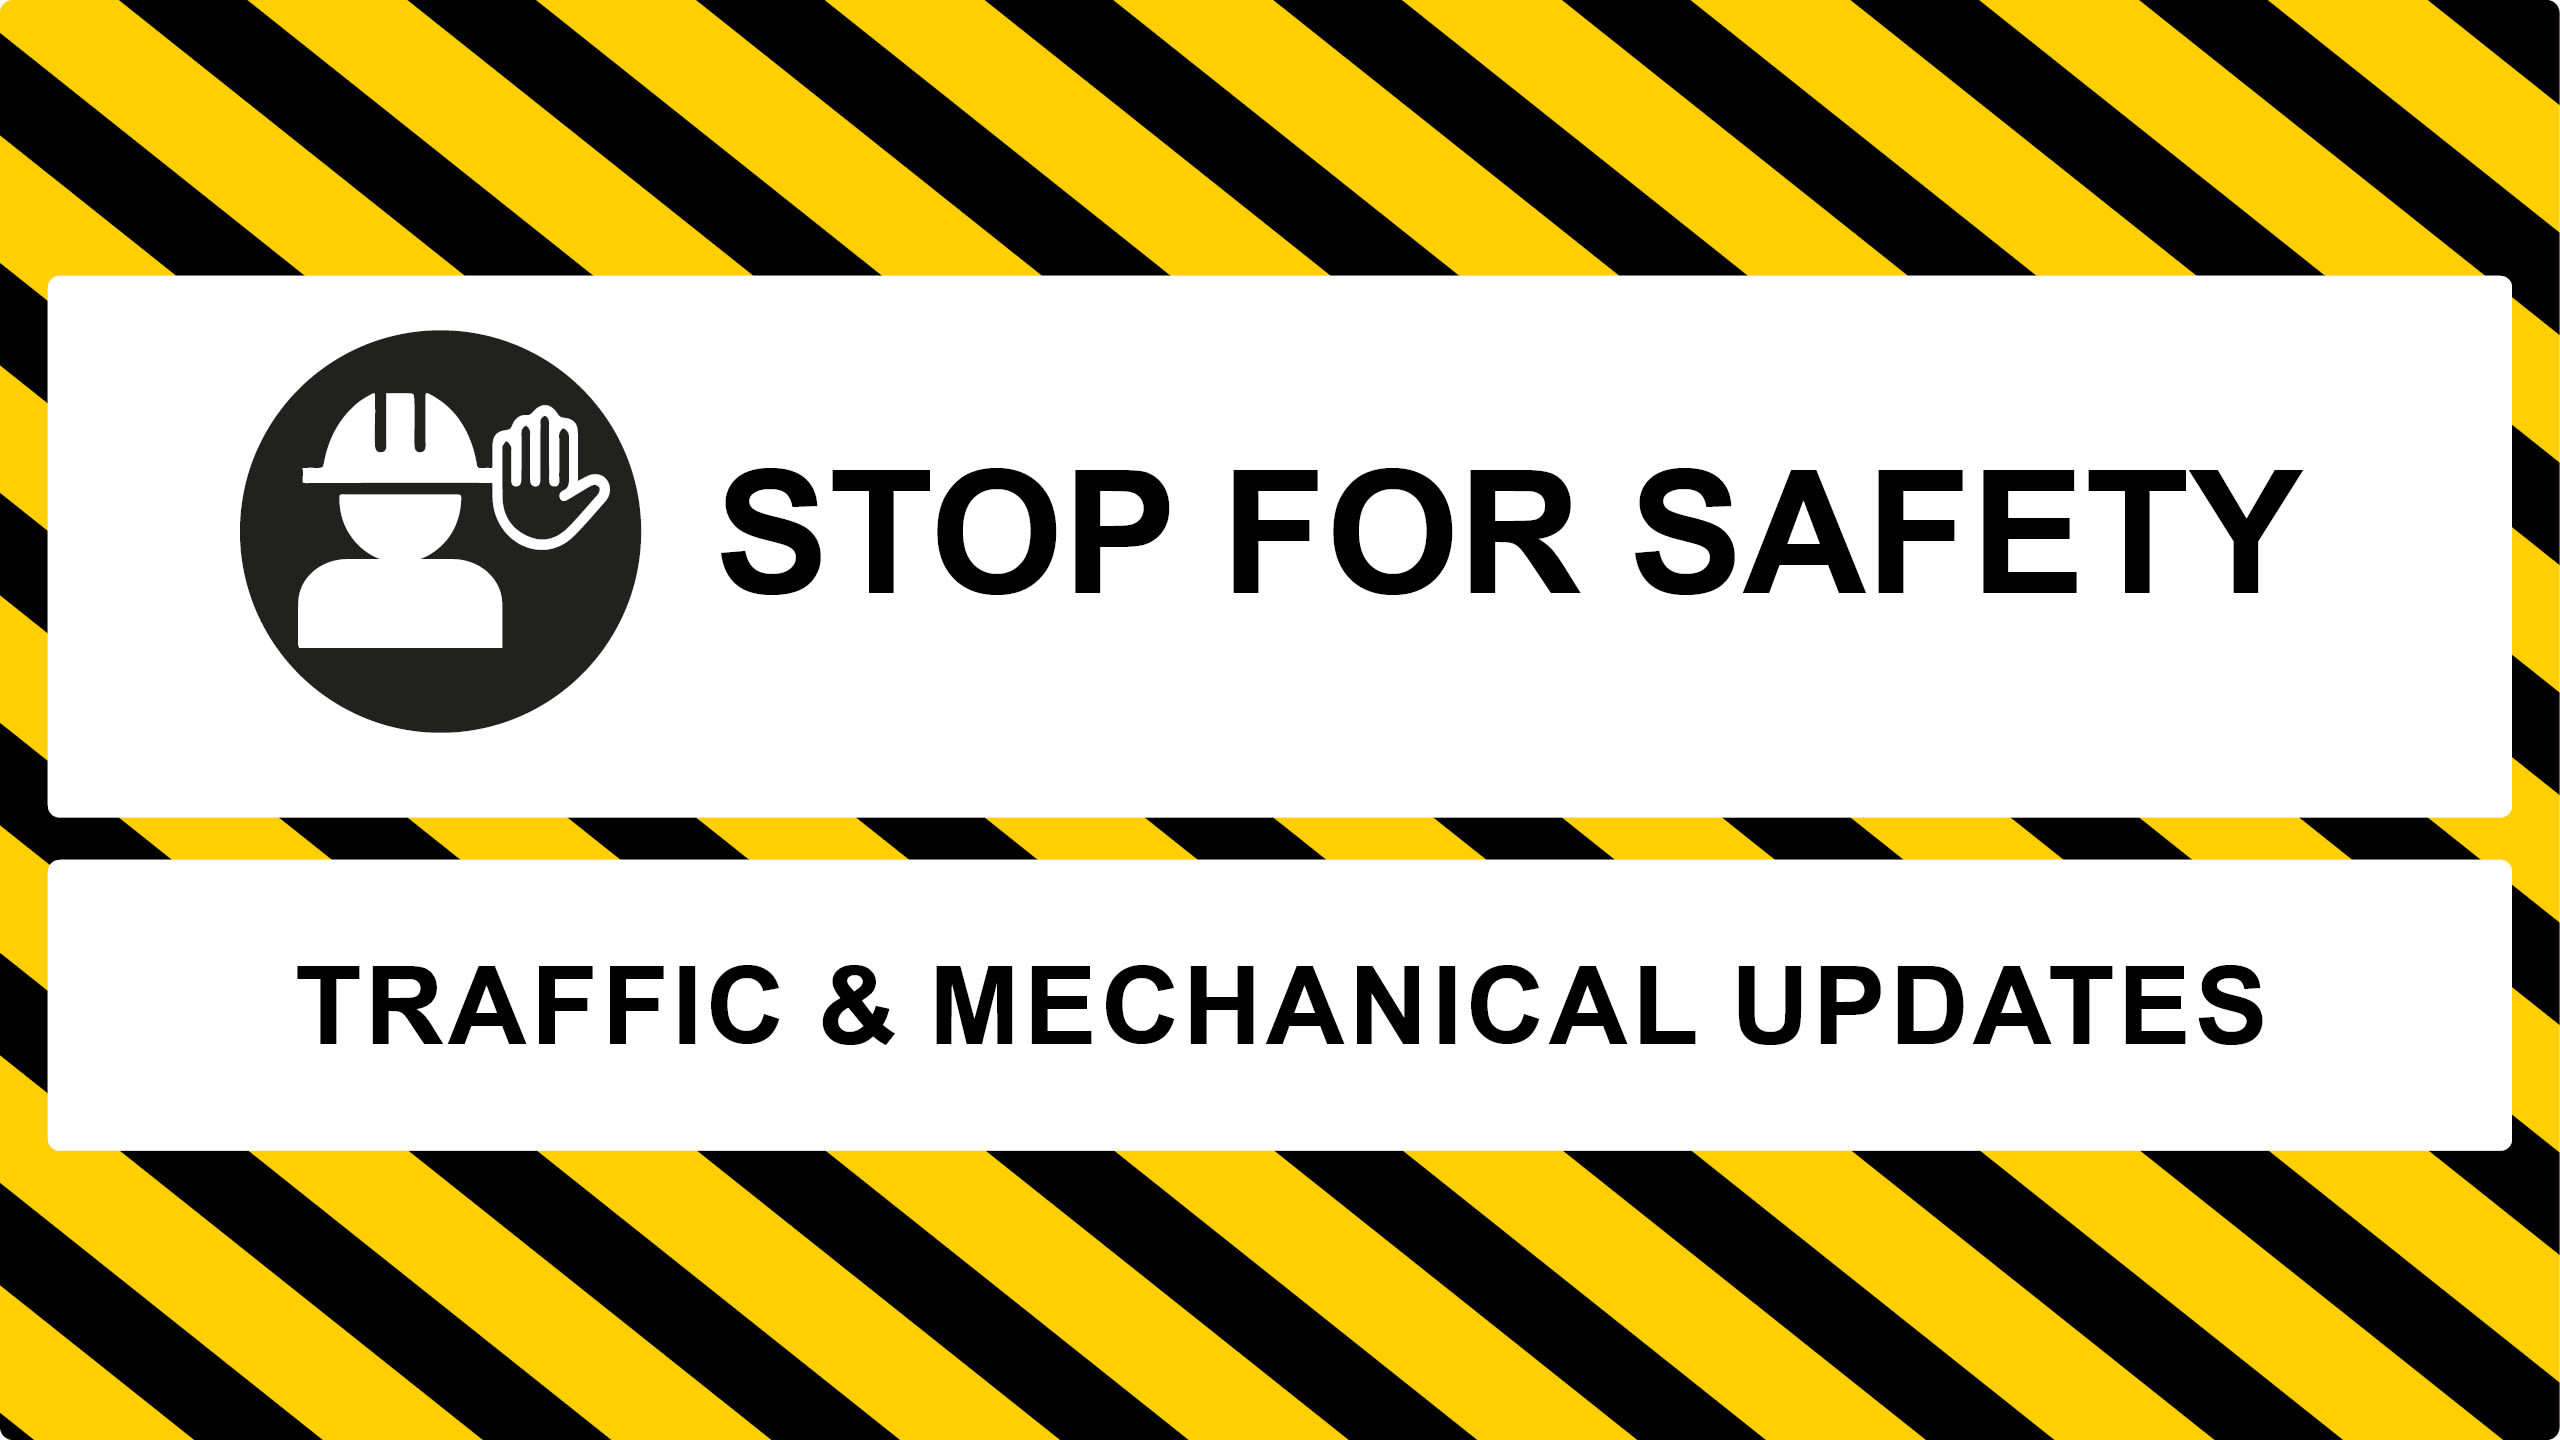 Stop for Safety Image. Traffic & Mechanical Updates